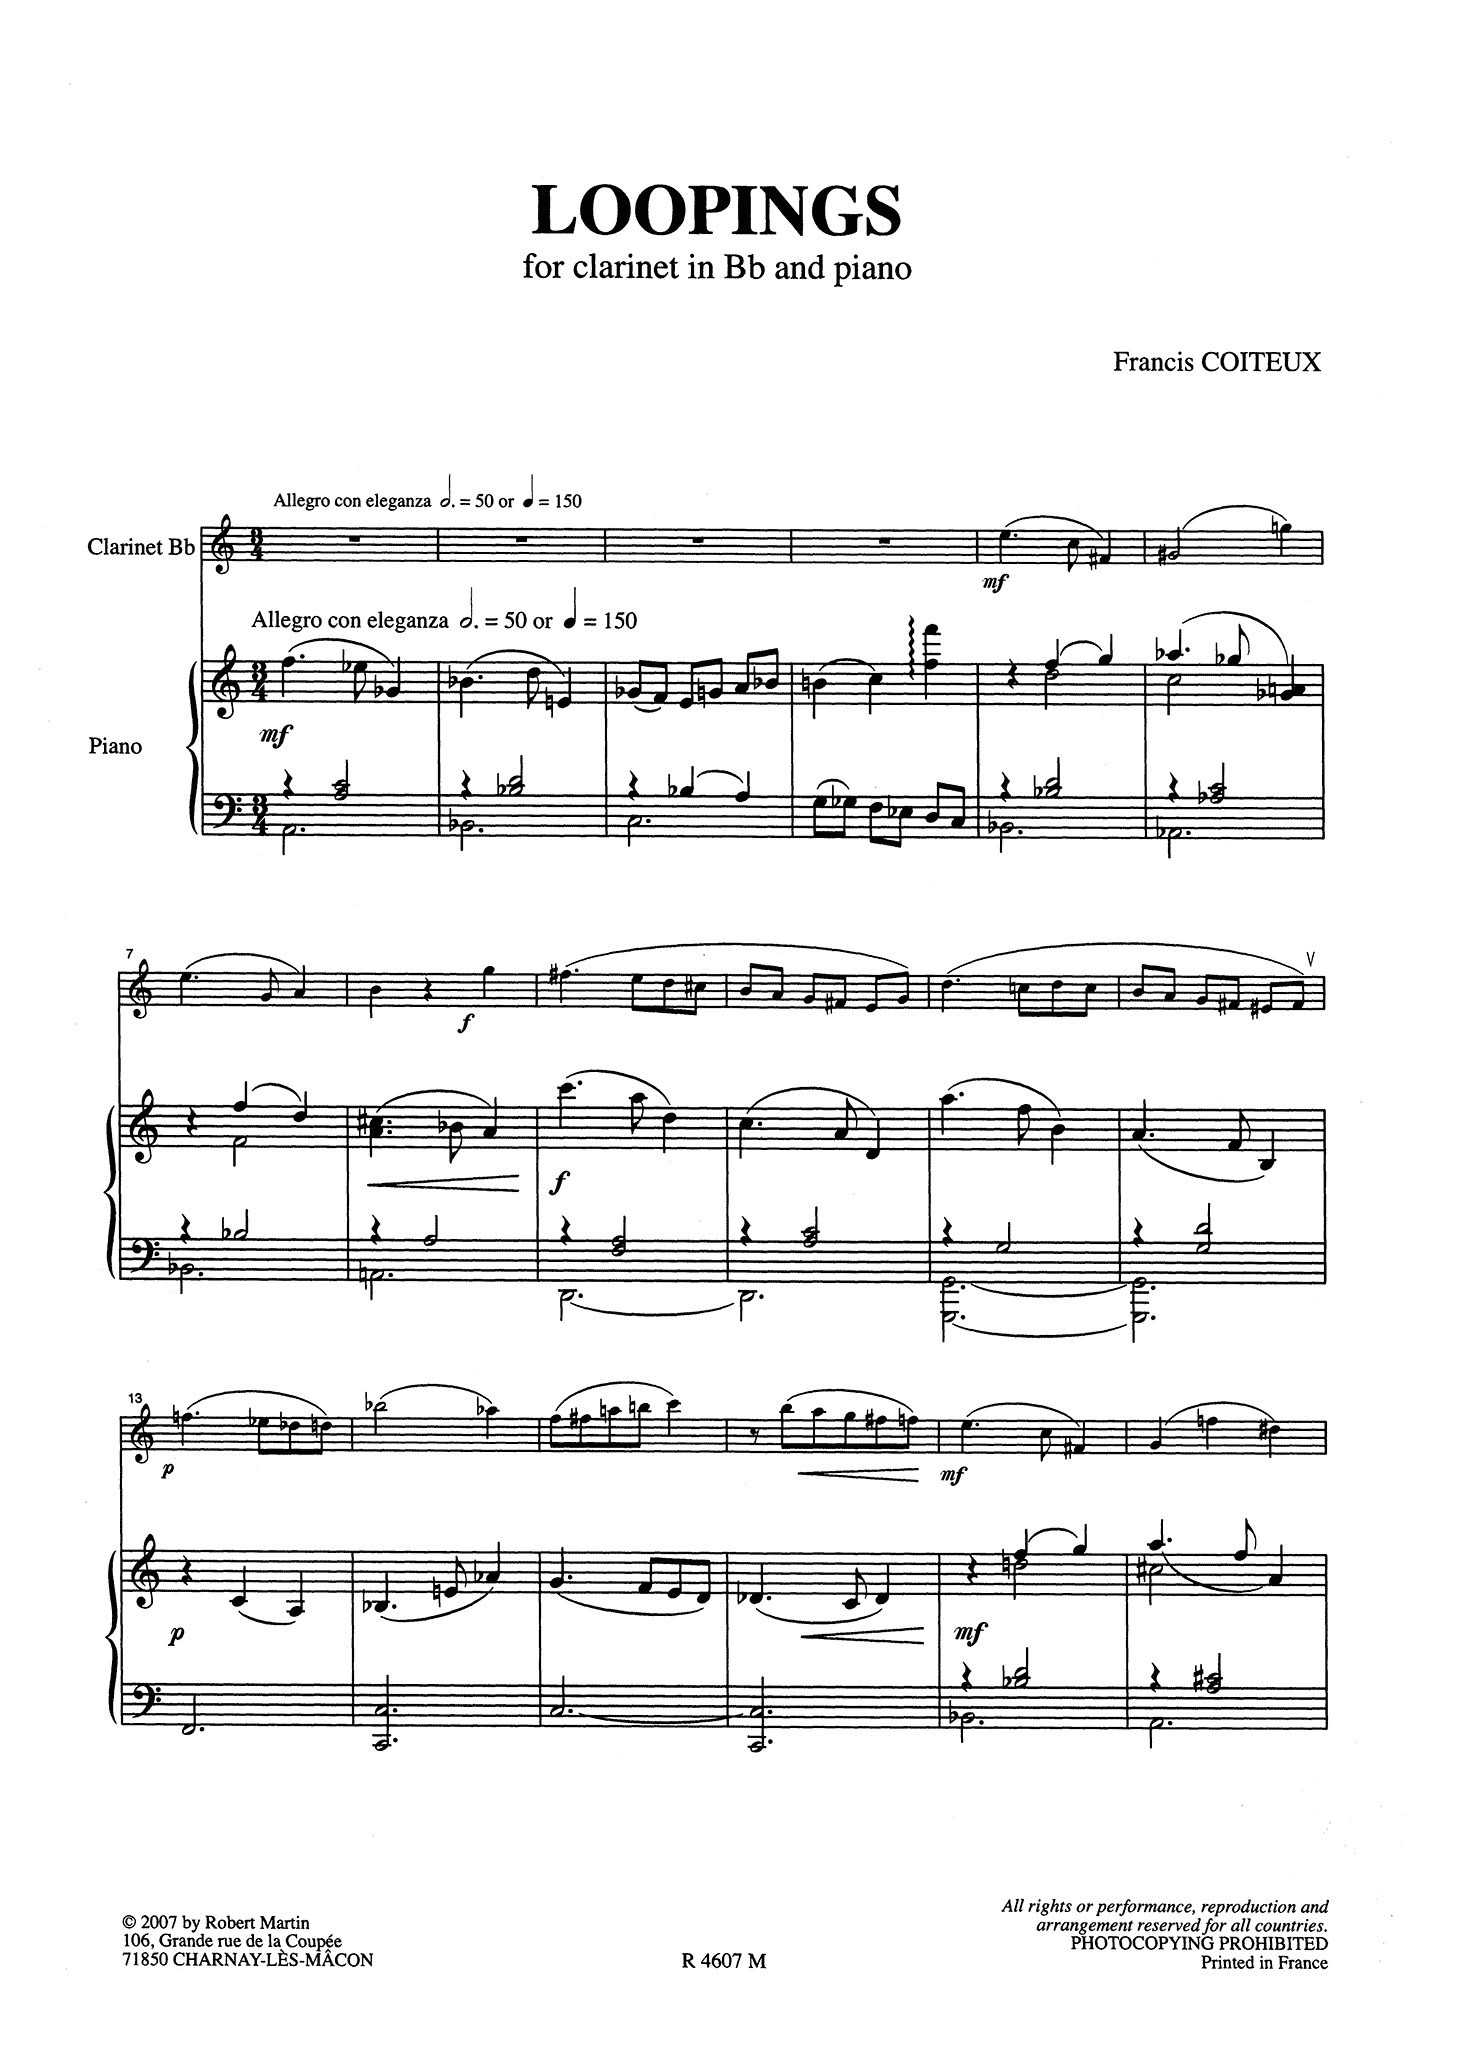 Coiteux Loopings clarinet and piano score